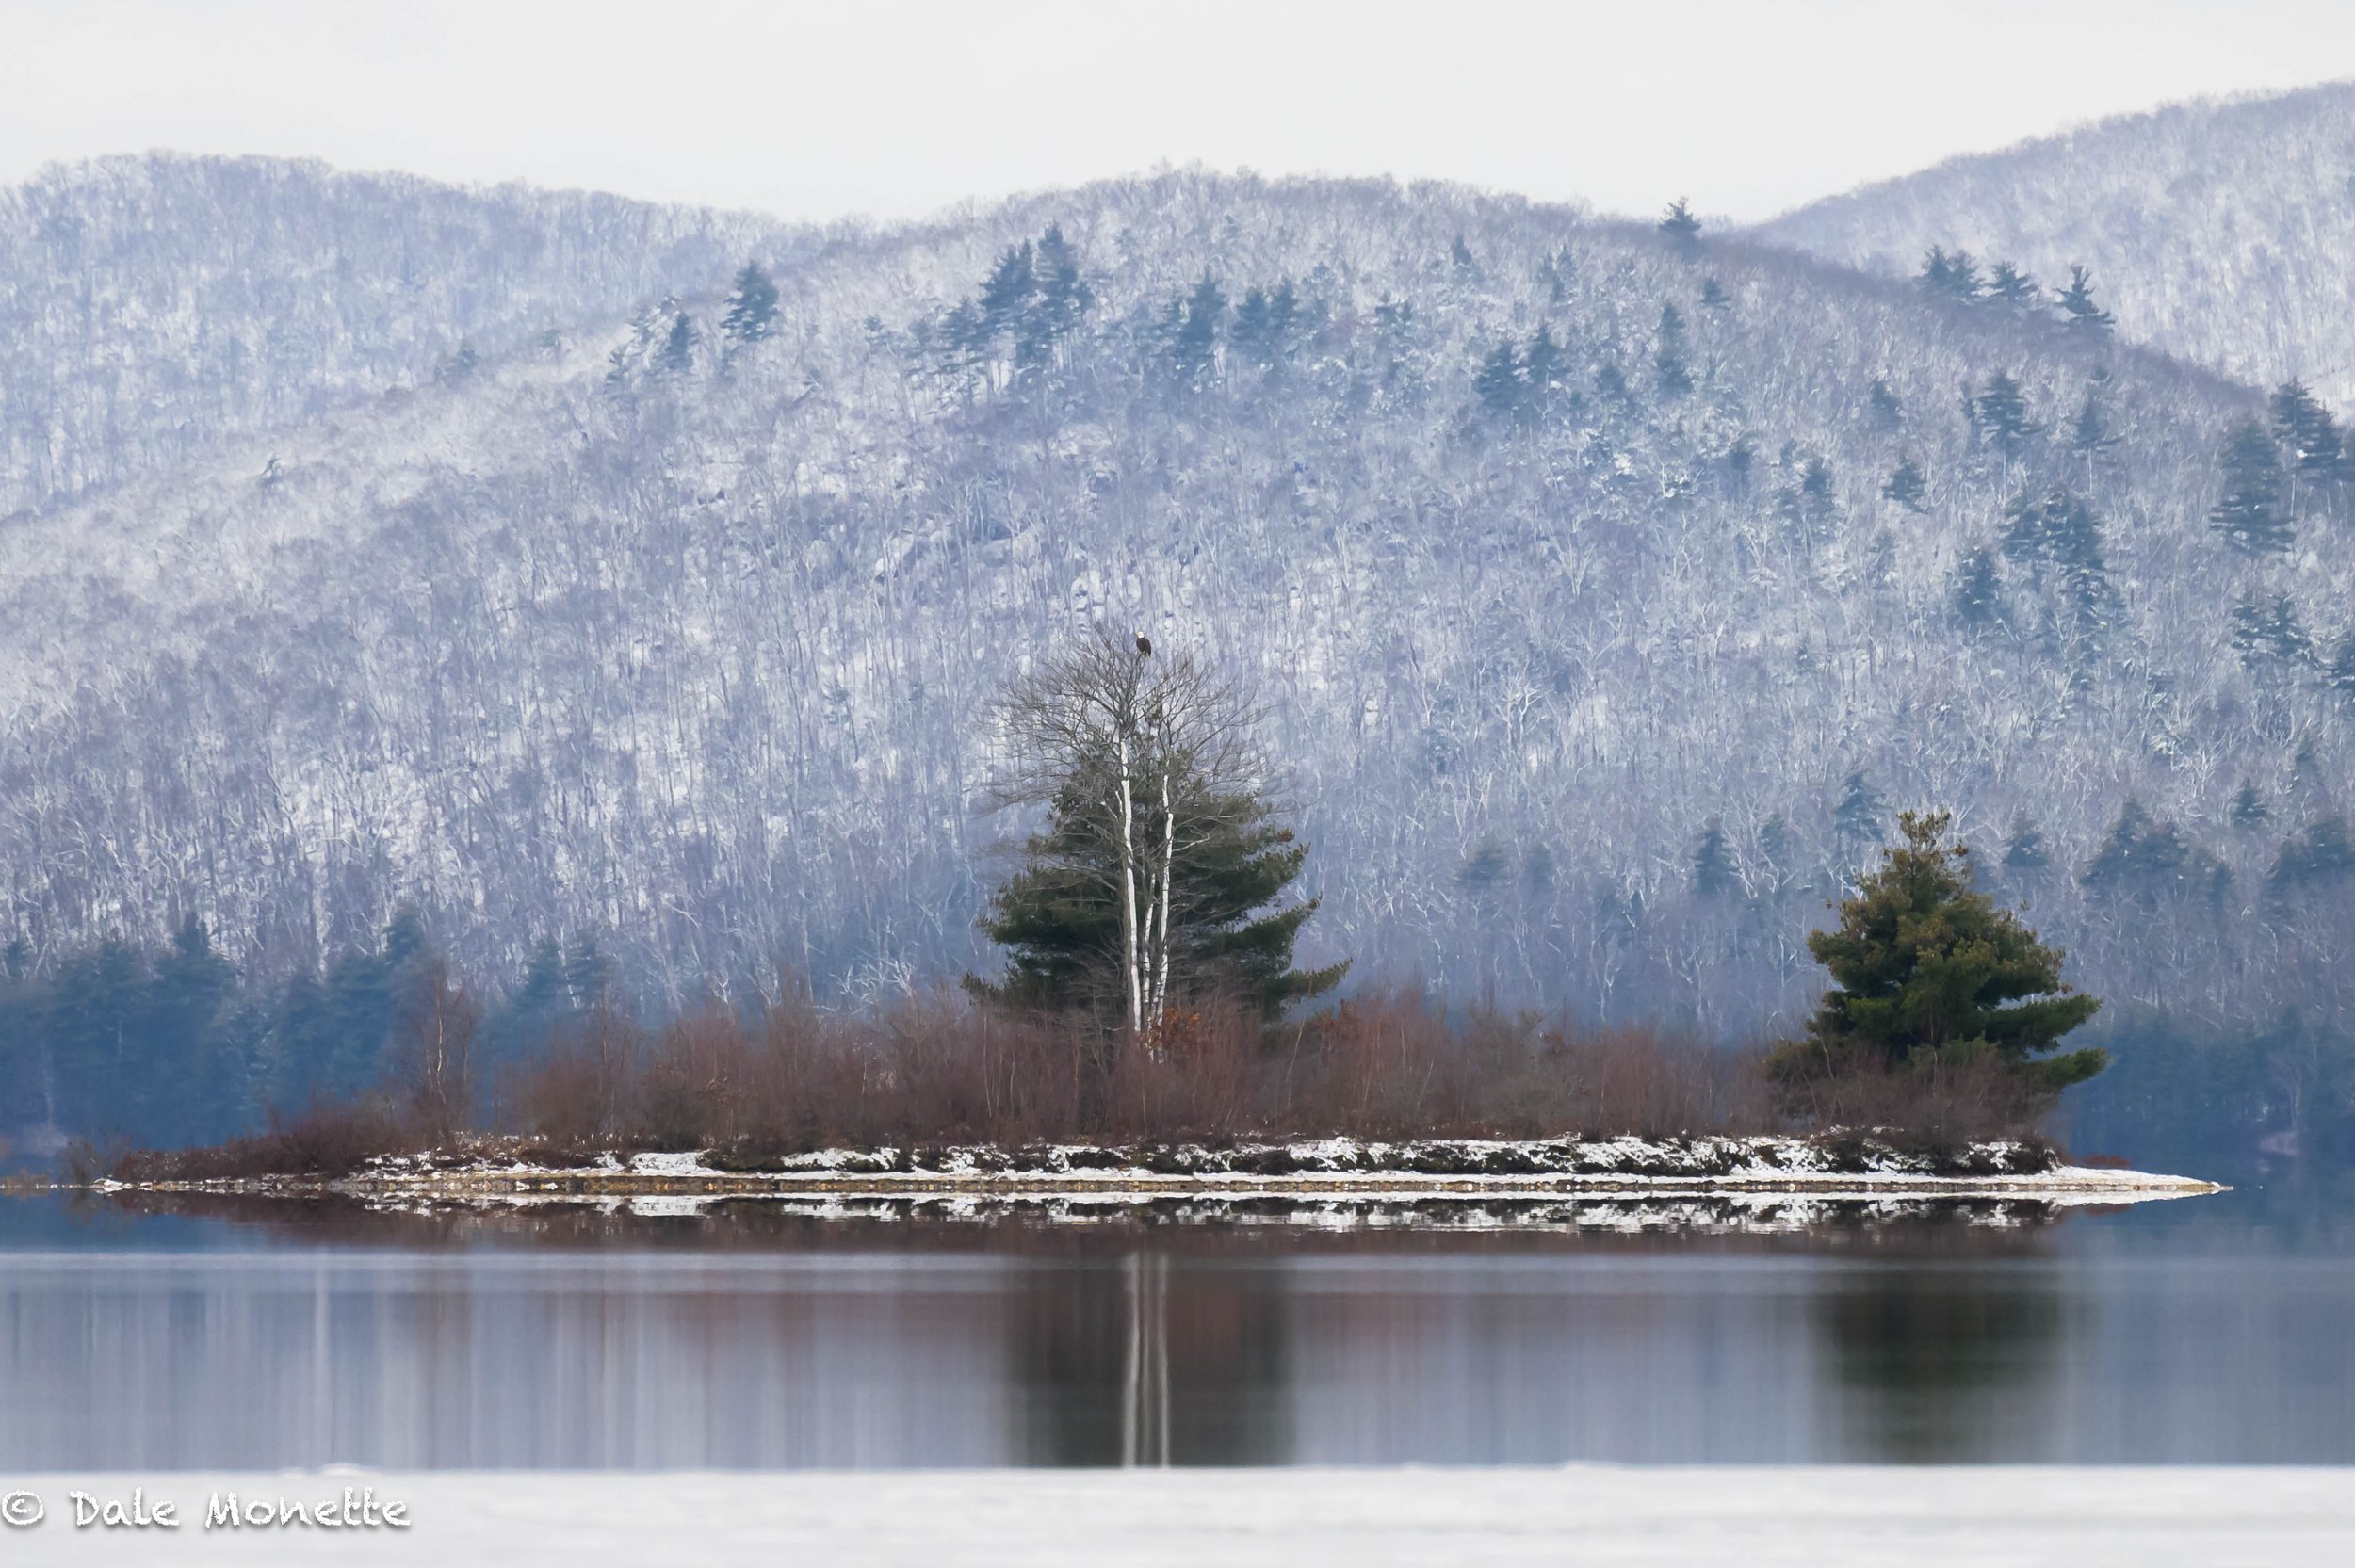   A calm winter morning on the Quabbin Reservoir… The large mountain in the background is Russ Mountain. The first eagles to nest in Massachusetts since 1906 nested there in 1987.  See my Voyagers, Visitors and Home book for the full story.  